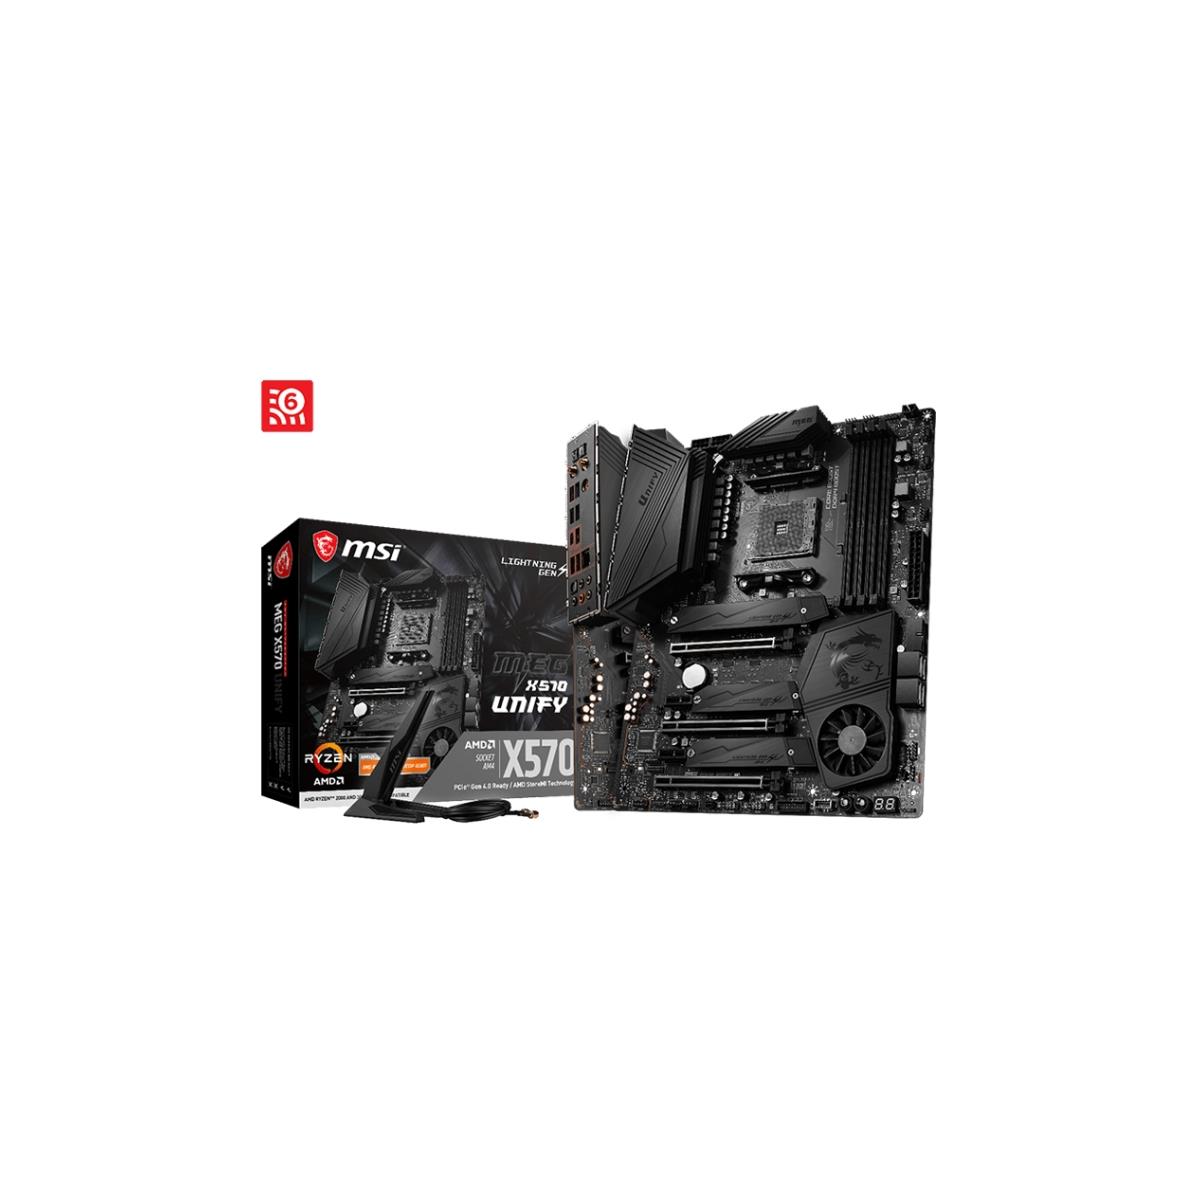 MSI Launches MEG X570 Unify Gaming Motherboard, Pushes Ryzen 9